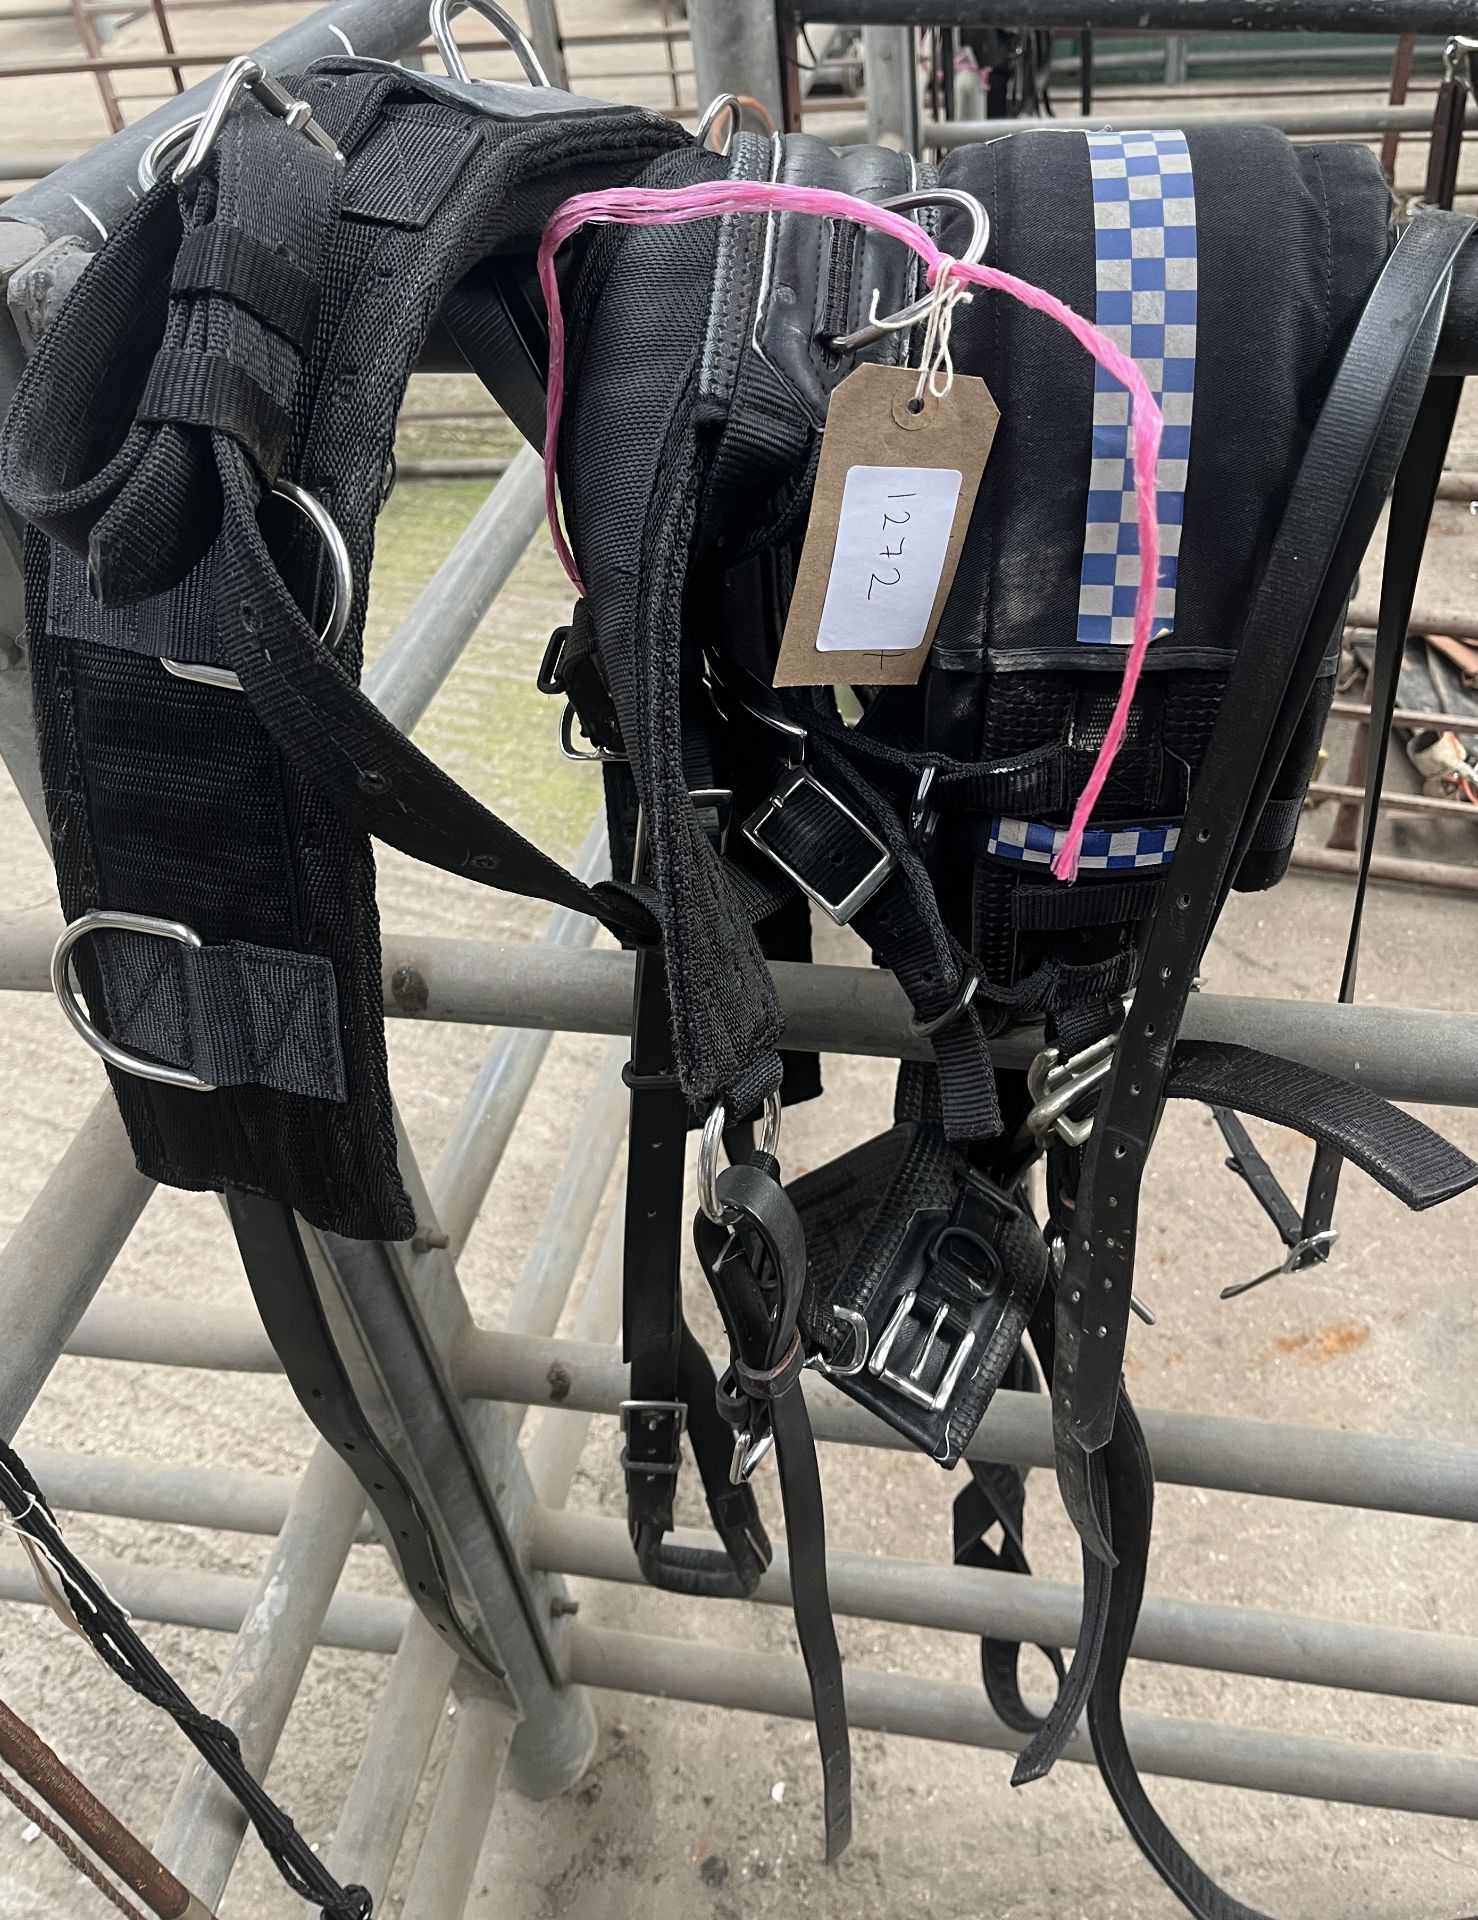 Black pony-sized synthetic breast harness with reflective road safety bands